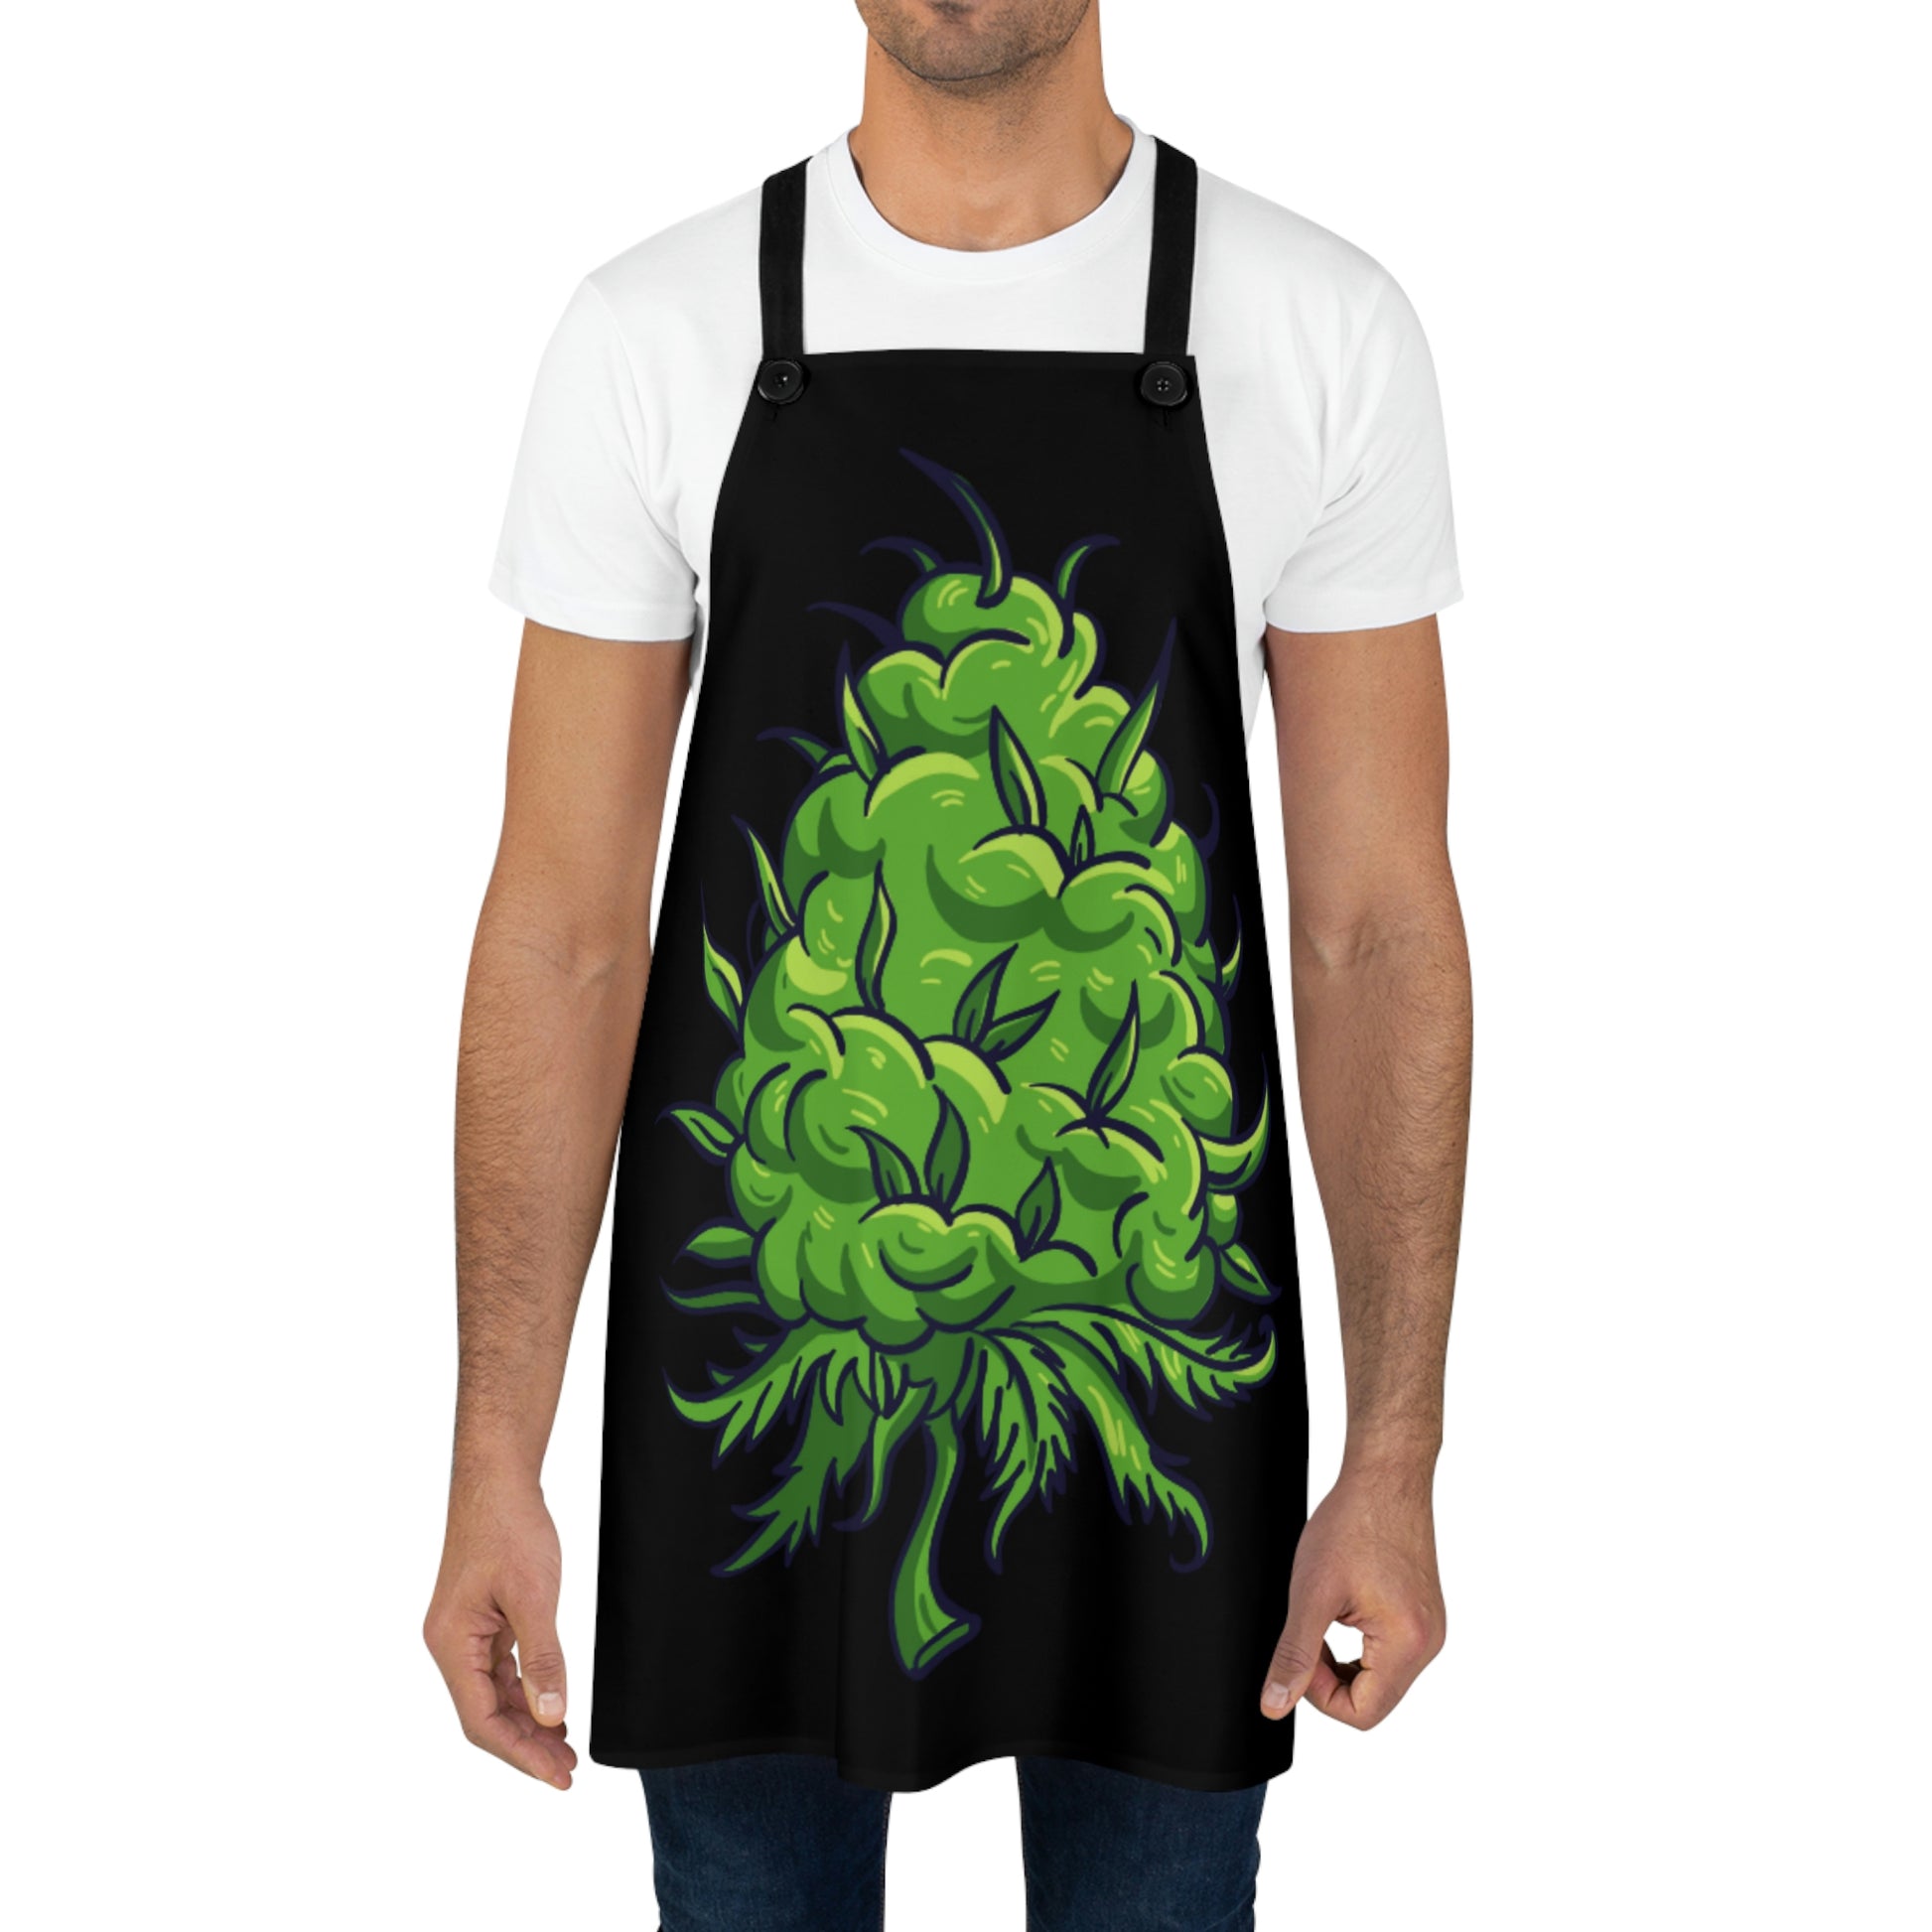 A man stands while he is wearing the Big Marijuana Bud Chef's Apron